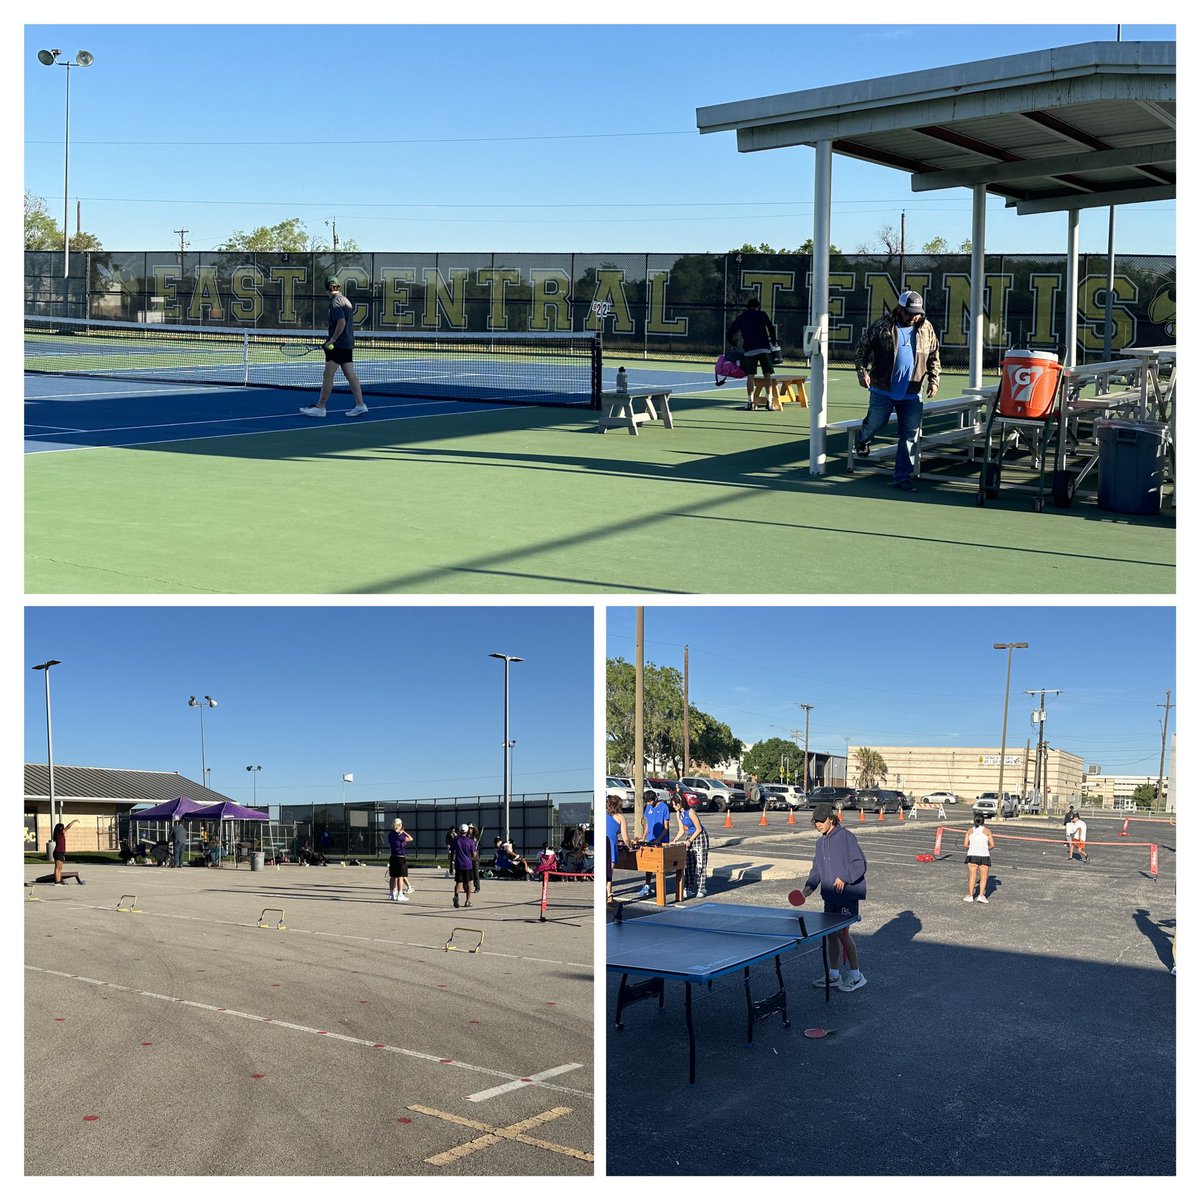 It's a beautiful morning at the East Central Grand Slam Invitational! A little Foosball, Mini-Tennis, Corn Hole, and Ping Pong in between matches is always FUN!!! 😎🎾 🎾 Willis 🎾 Lockhart 🎾 Mercedes 🎾 El Paso Monwood 🎾 Randolph 🎾 Wagner 🎾 El Paso Américas